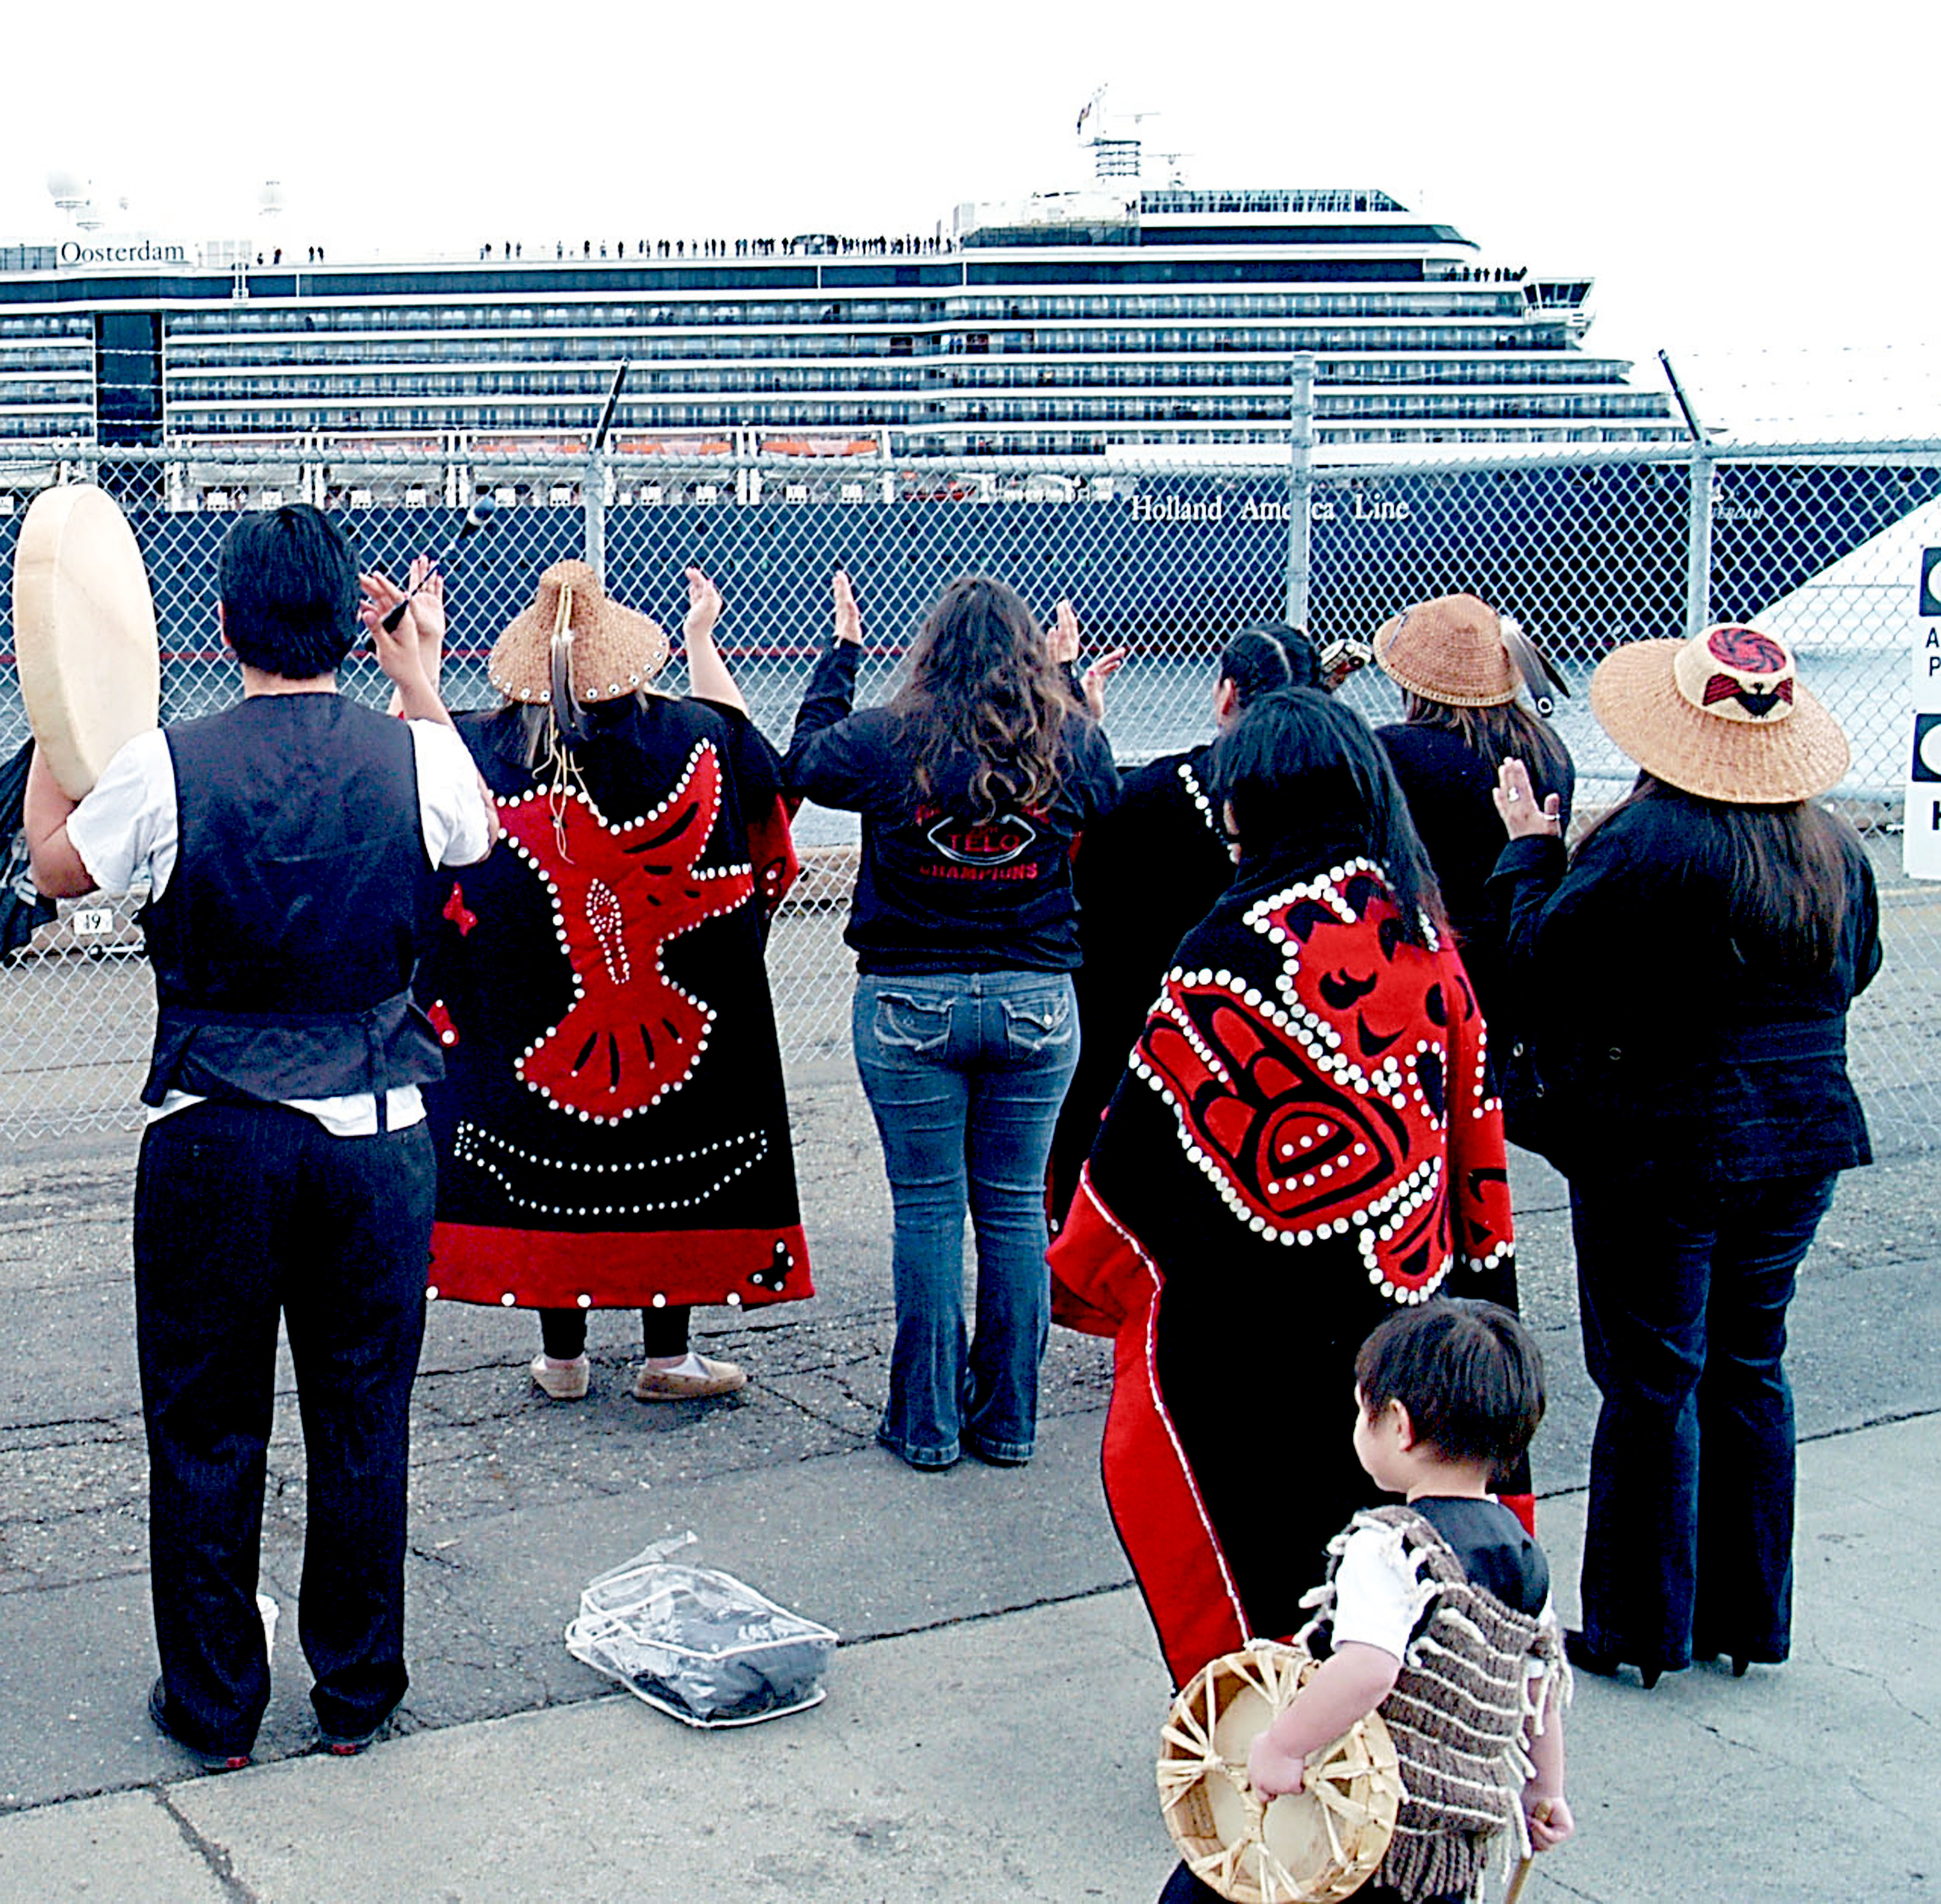 Lower Elwha Klallam tribal members welcome the ms Oosterdam when the 950-foot cruise ship visited Port Angeles in 2012. The liner makes a return visit May 9.  —Photo by Keith Thorpe/Peninsula Daily News